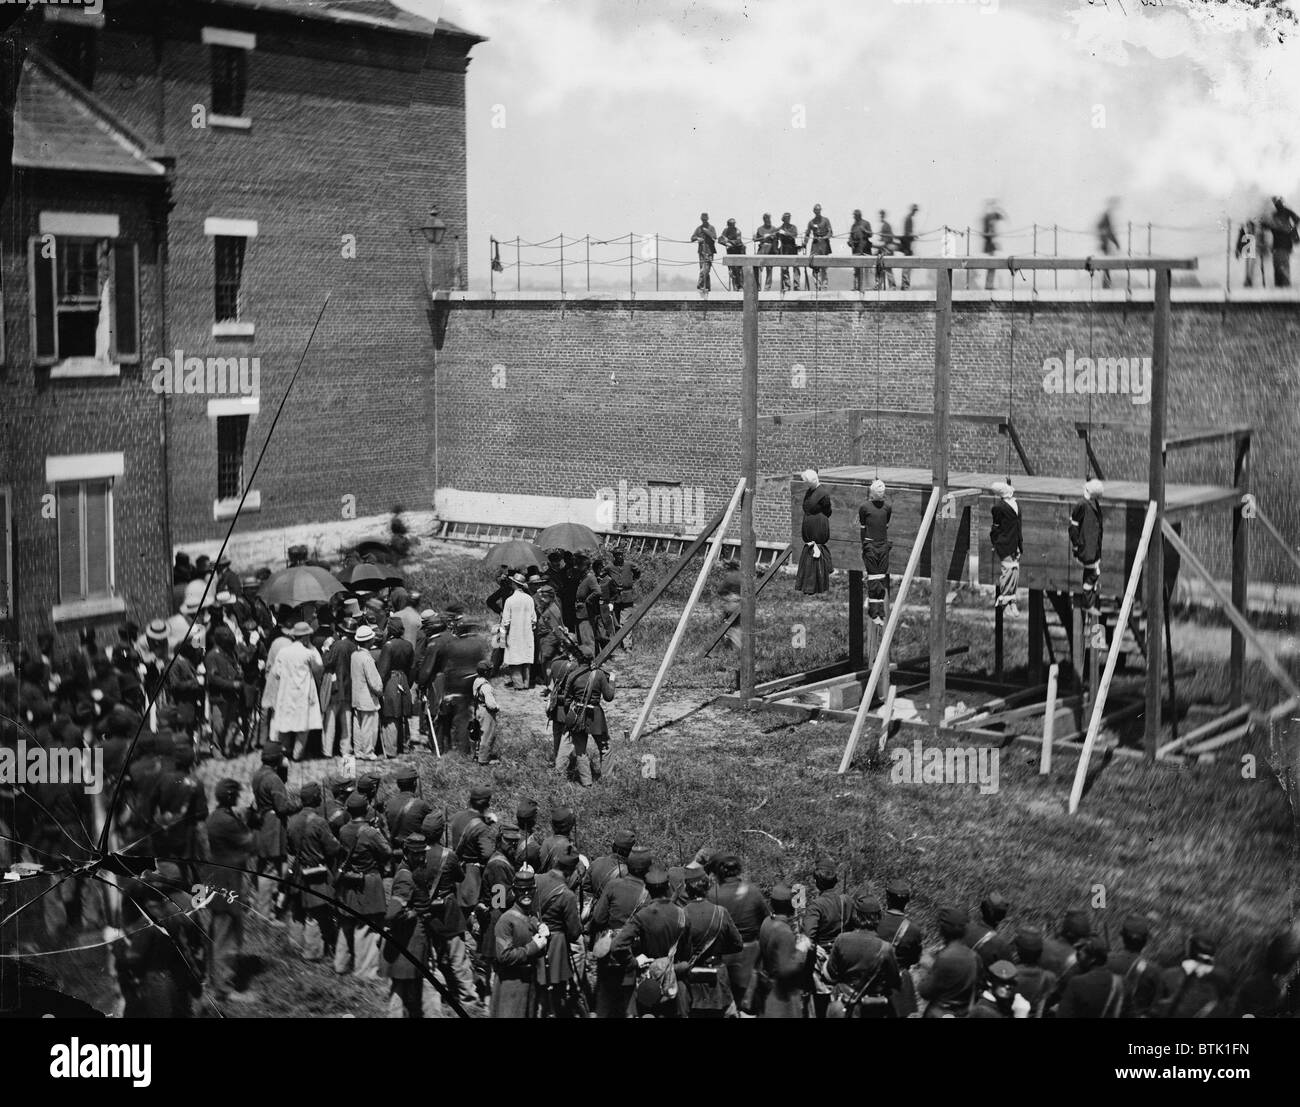 The assassination of President Abraham Lincoln, hanging hooded bodies of the four conspirators, (Mary E. Surratt, Lewis Payne, David E. Herold, George Atzerodt, crowd departing, Washington DC, photograph by Alexander Gardner, July 7, 1865. Stock Photo